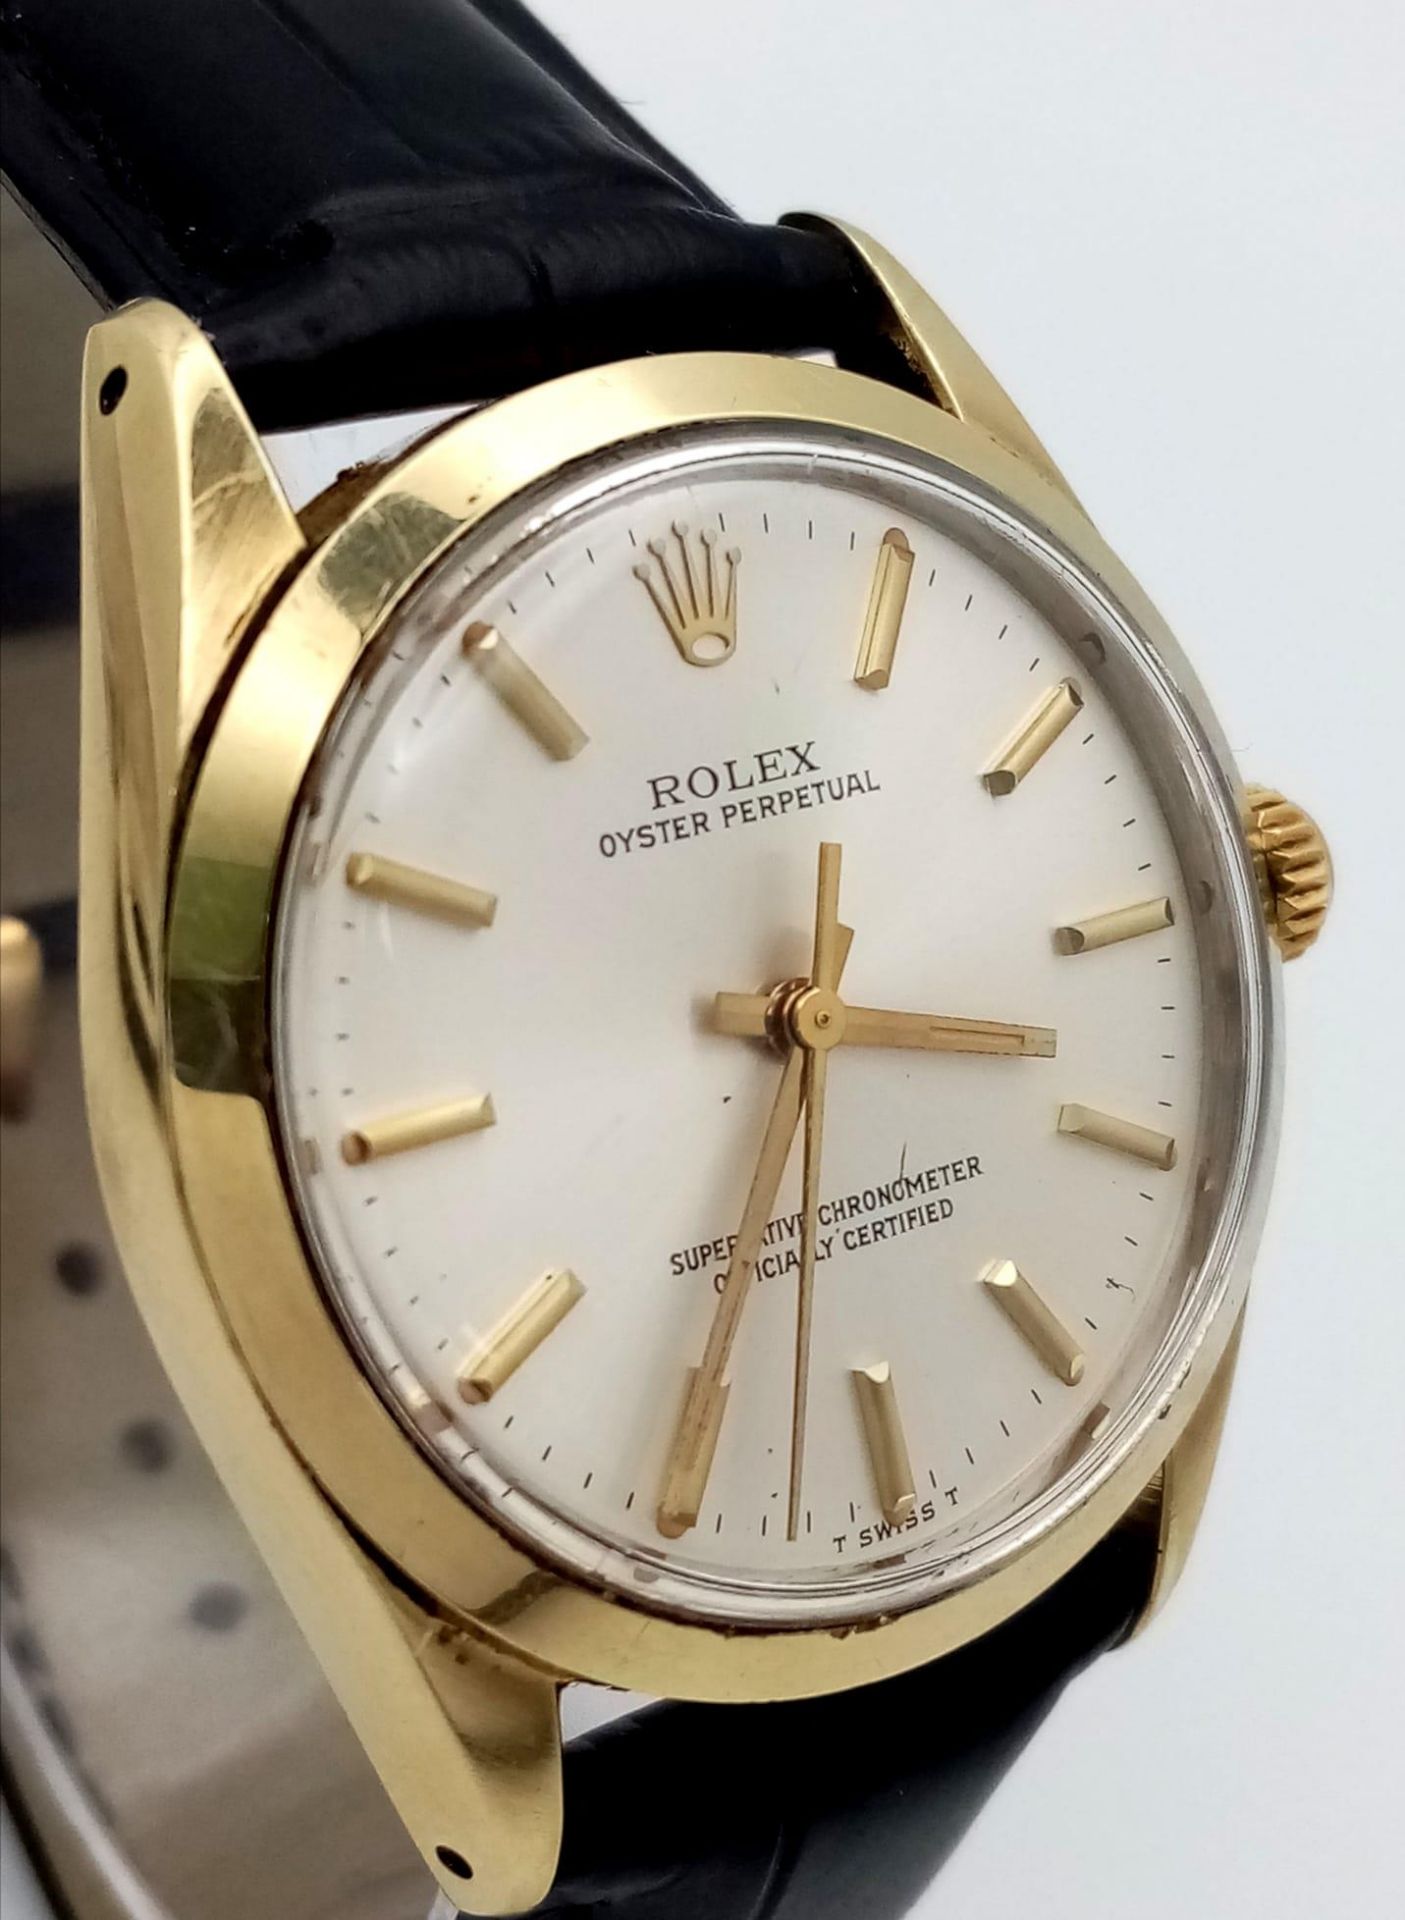 A VINTAGE ROLEX OYSTER PERPETUAL GENTS WATCH ON THE ORIGINAL ROLEX BLACK LEATHER STRAP ONLY WORN A - Image 3 of 9